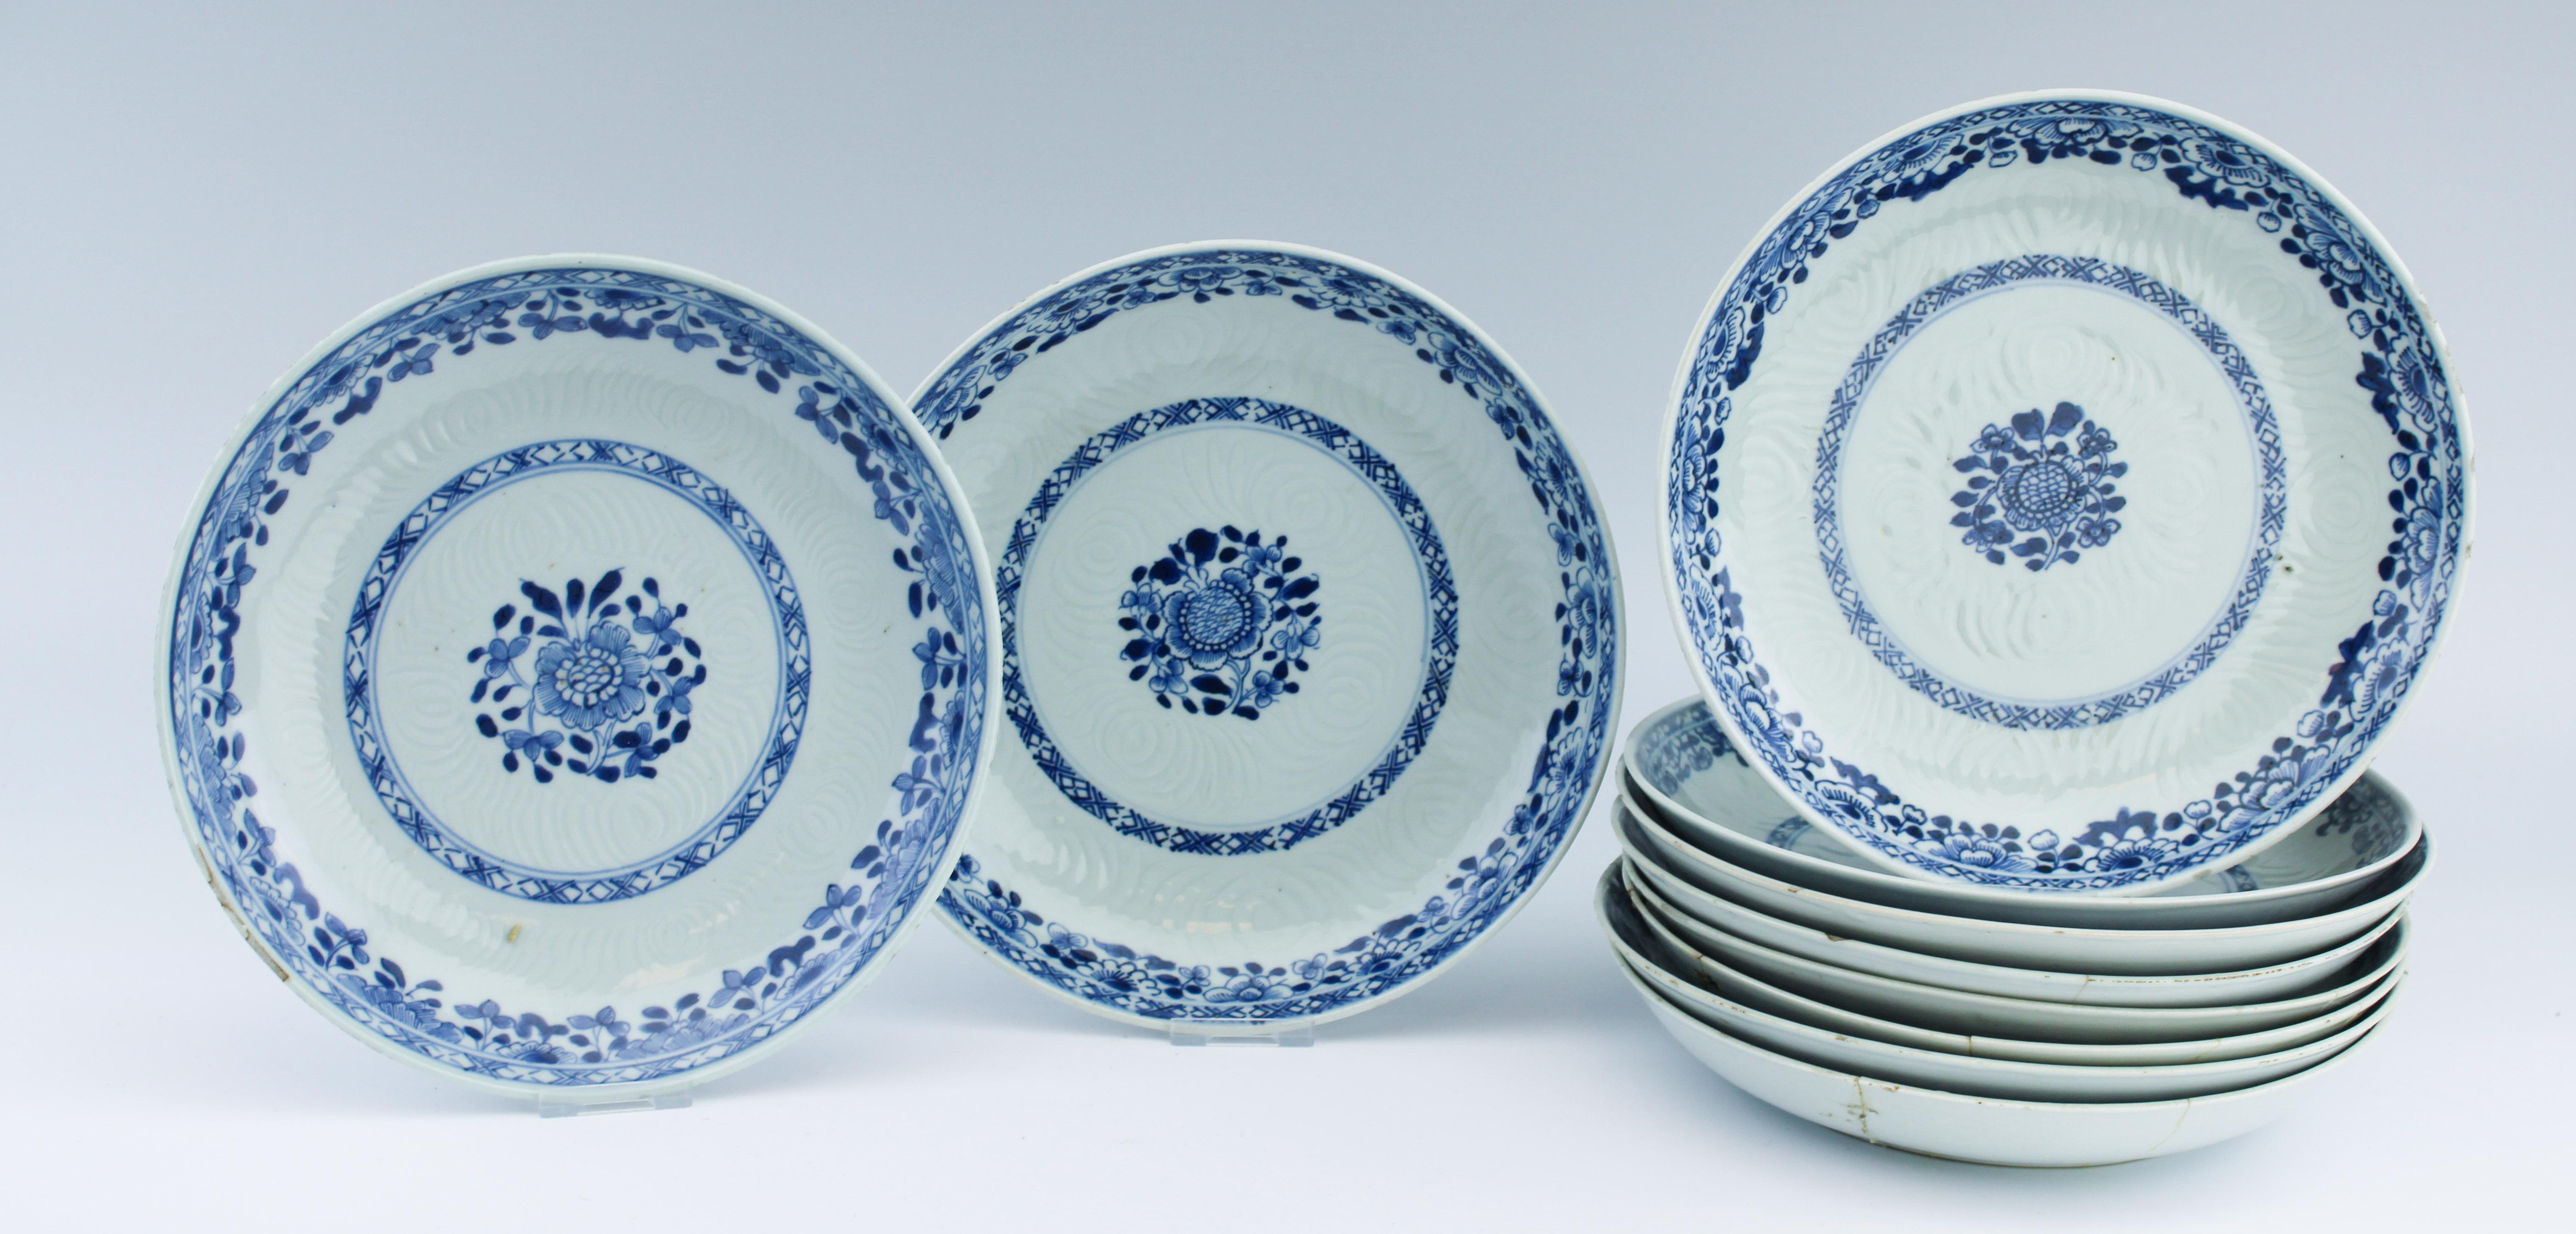 A very nicely decorated SET of Dishes in Blue and white, Kangxi Period in Japanese Kraak Style. Around 1700. Decorated with flowers and birds

Condition
Very good condition. Minor frits and chips to the rim. Two with a hairline. 1 to rim, 1 to base